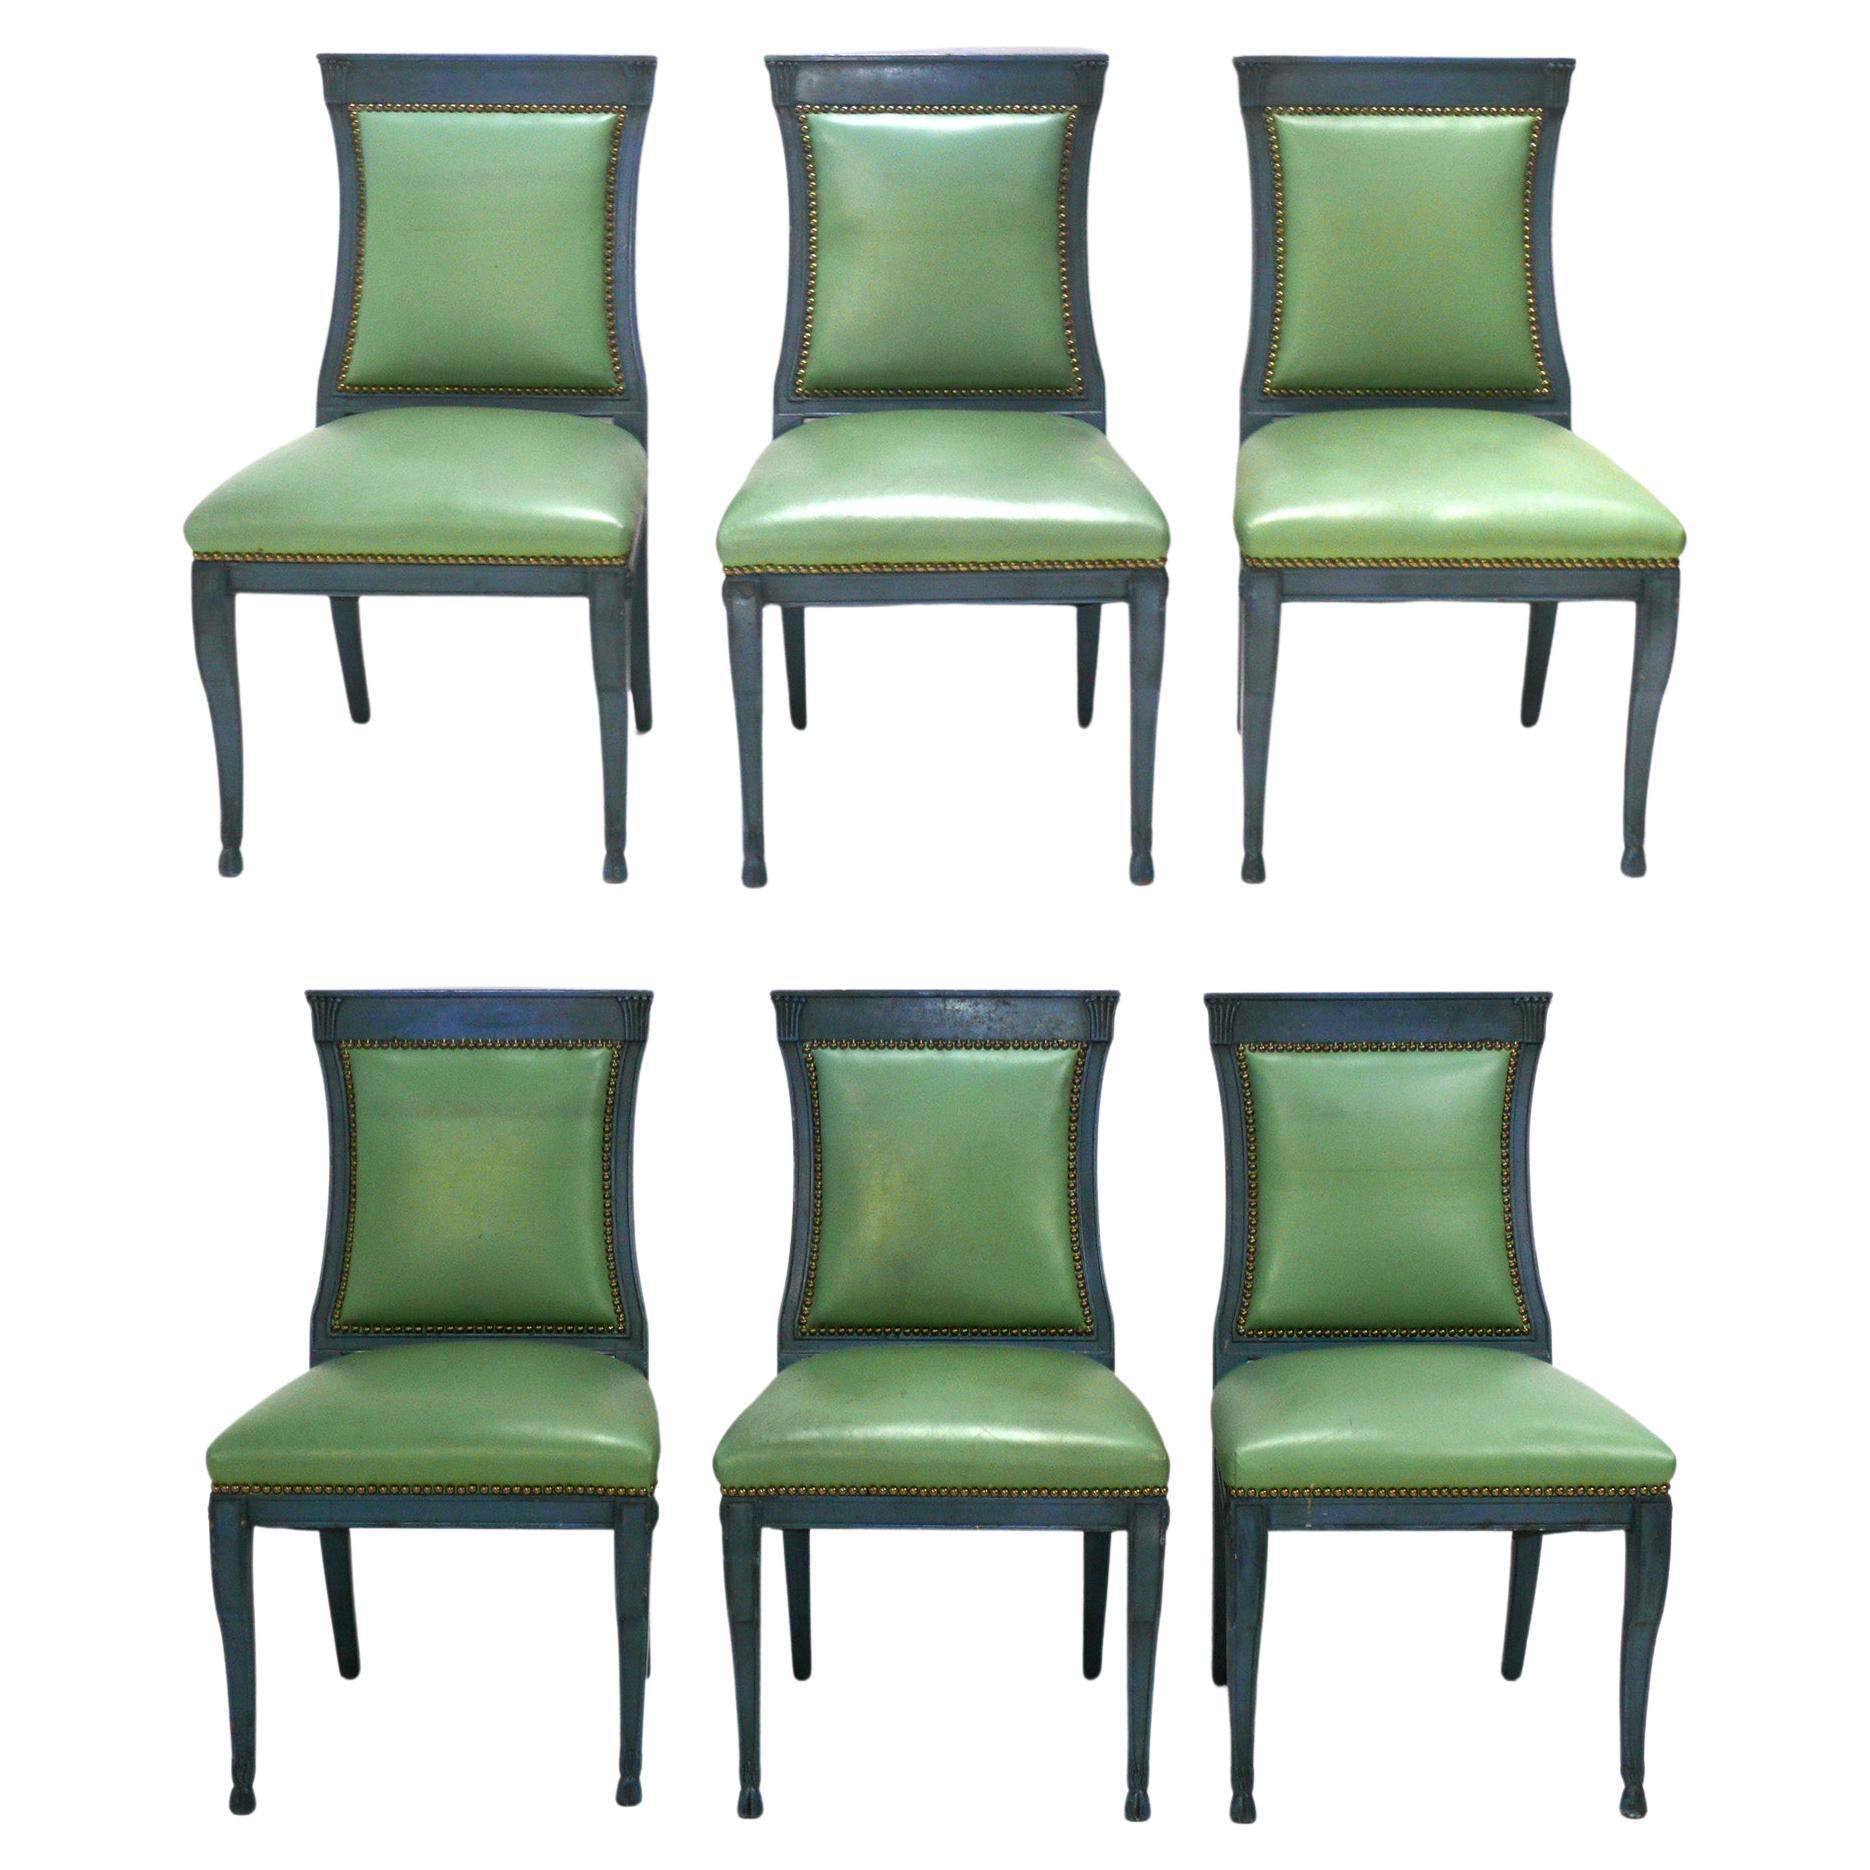 Set of Six French Empire Style Dining Chairs Refinished in Your Color Choice